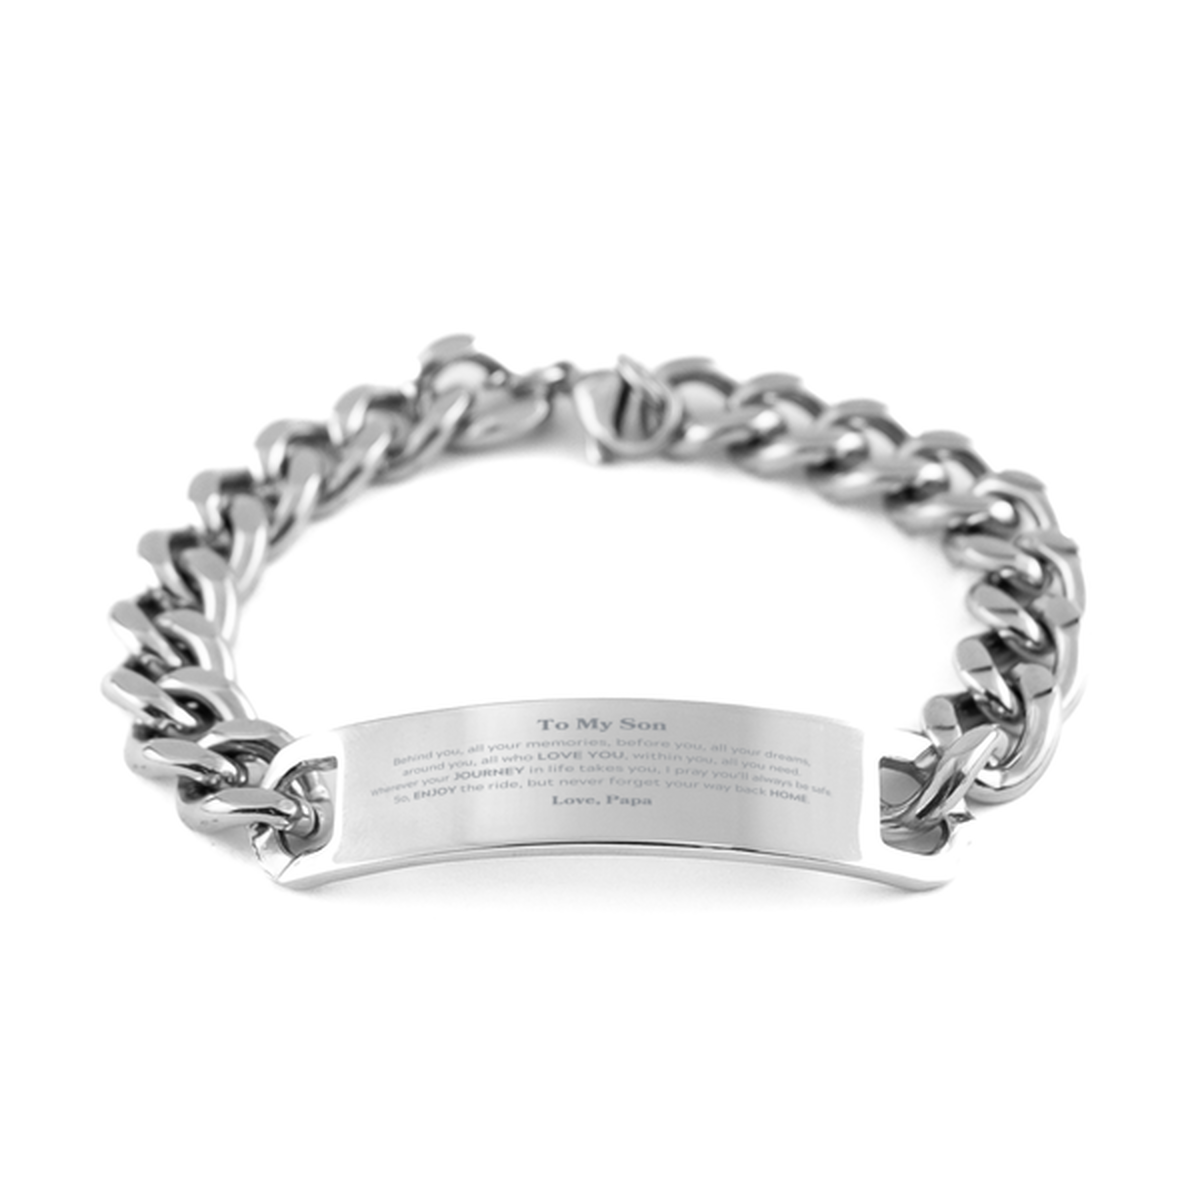 To My Son Graduation Gifts from Papa, Son Cuban Chain Stainless Steel Bracelet Christmas Birthday Gifts for Son Behind you, all your memories, before you, all your dreams. Love, Papa